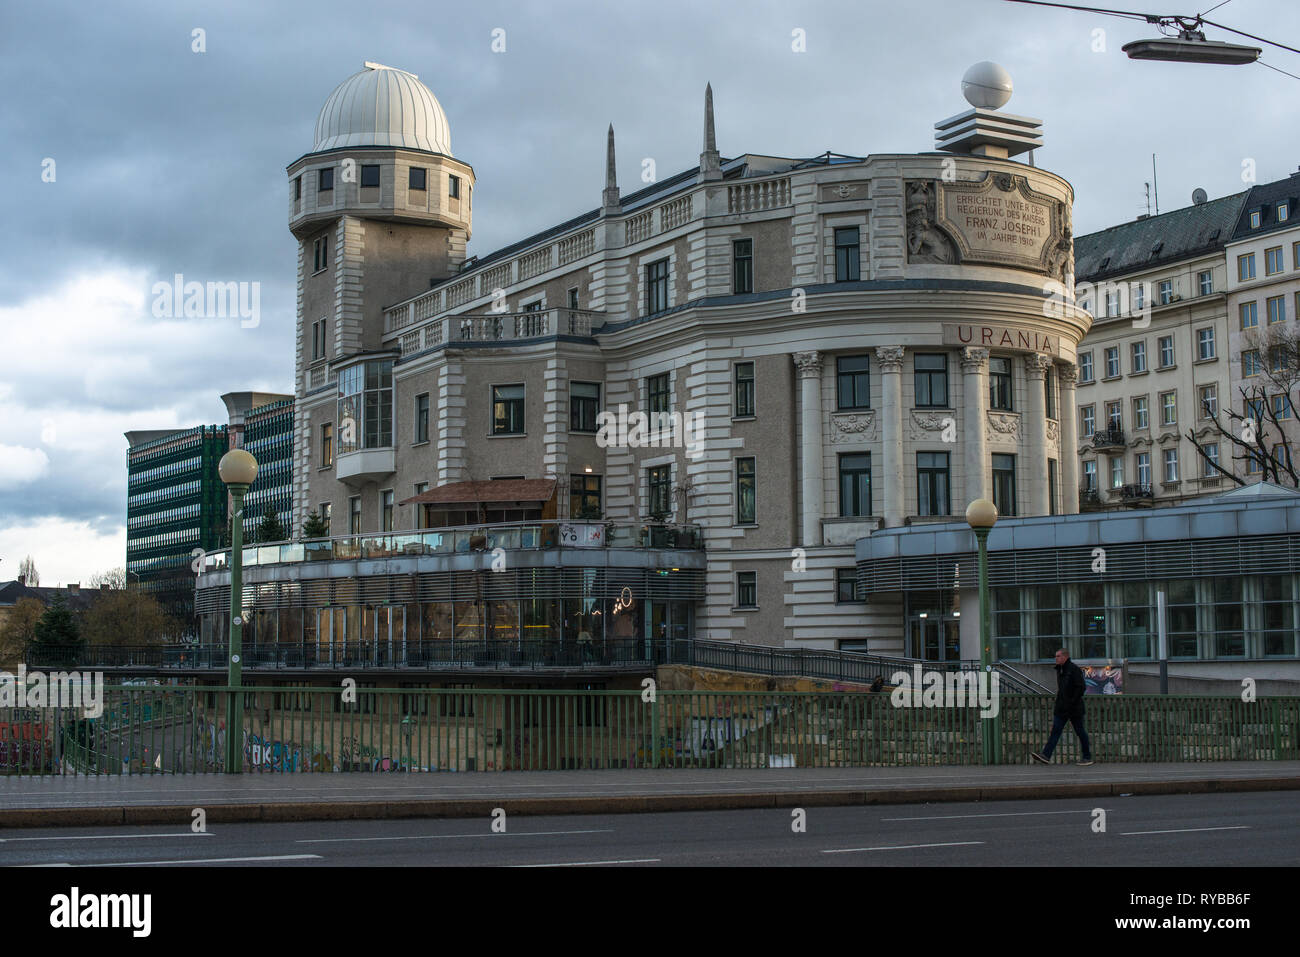 Urania is a public educational institute and observatory in Vienna, Austria. Stock Photo